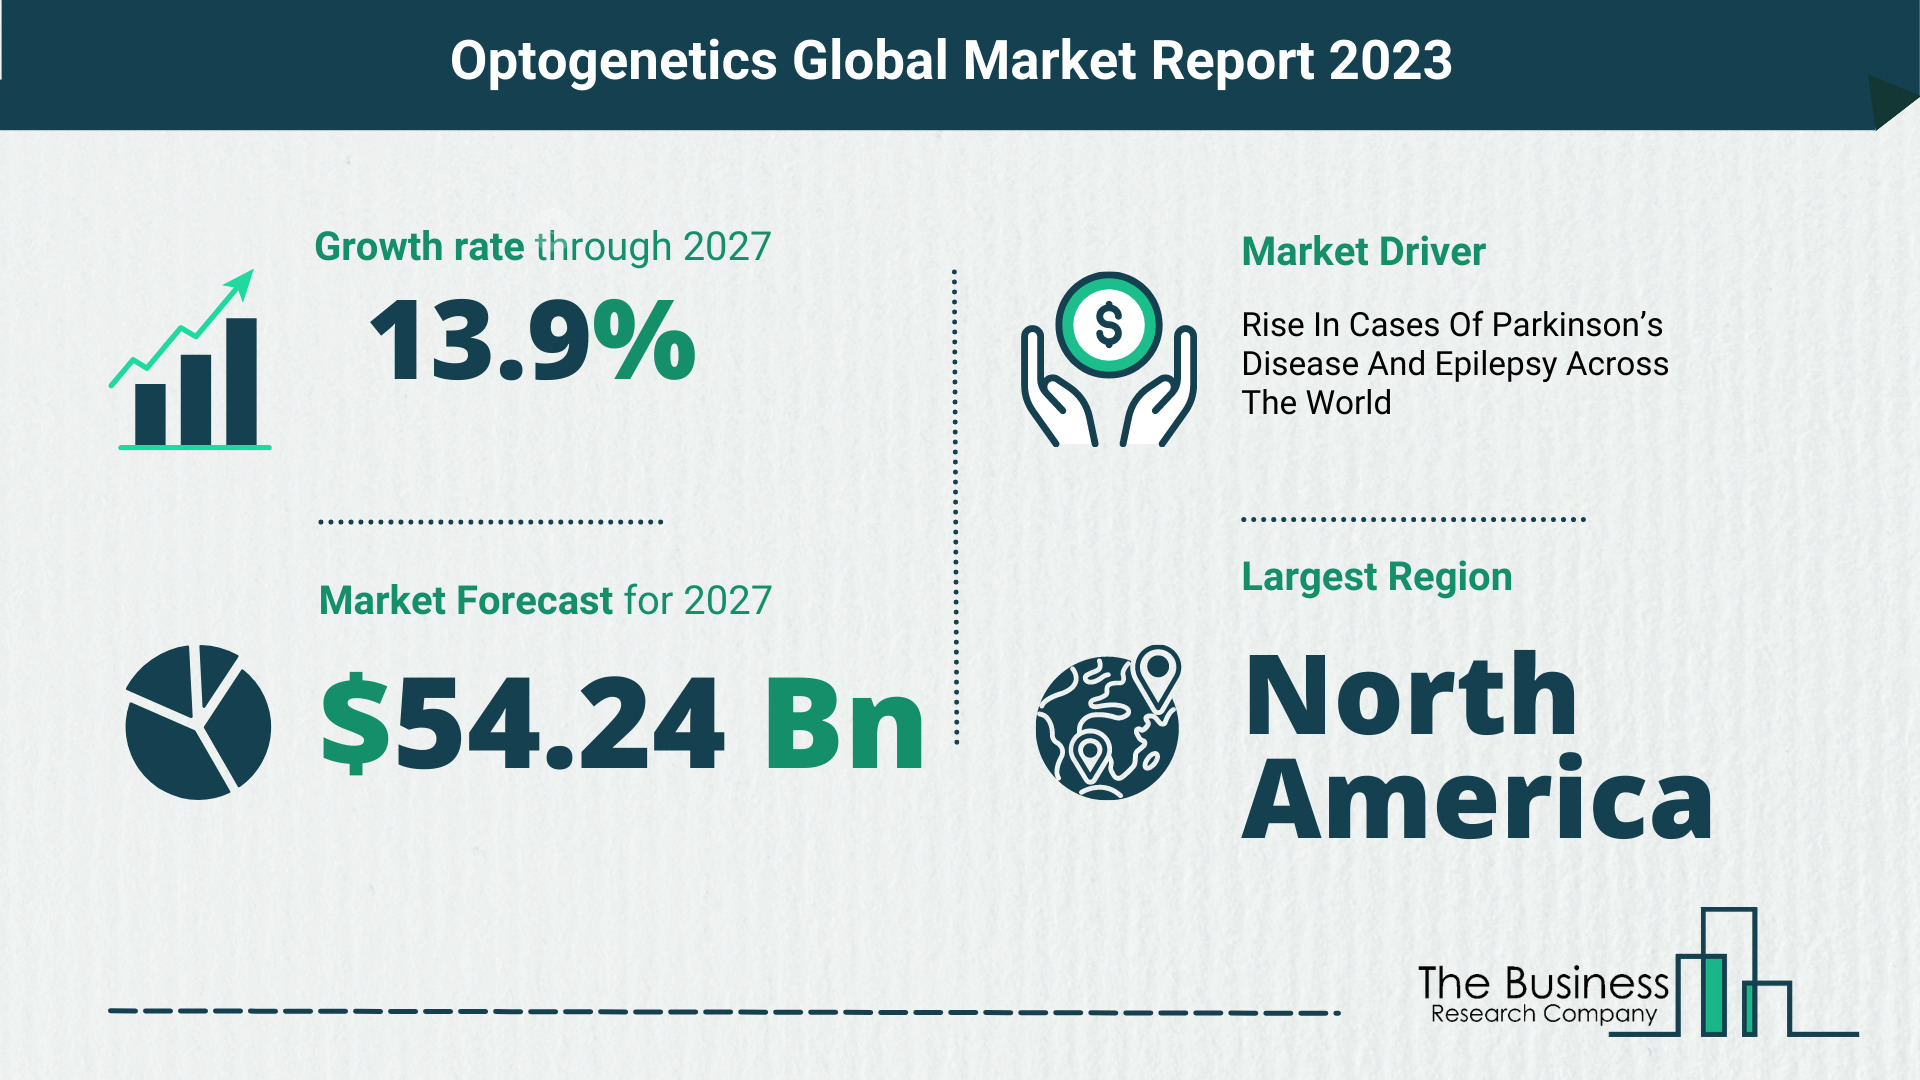 How Will The Optogenetics Market Globally Expand In 2023?